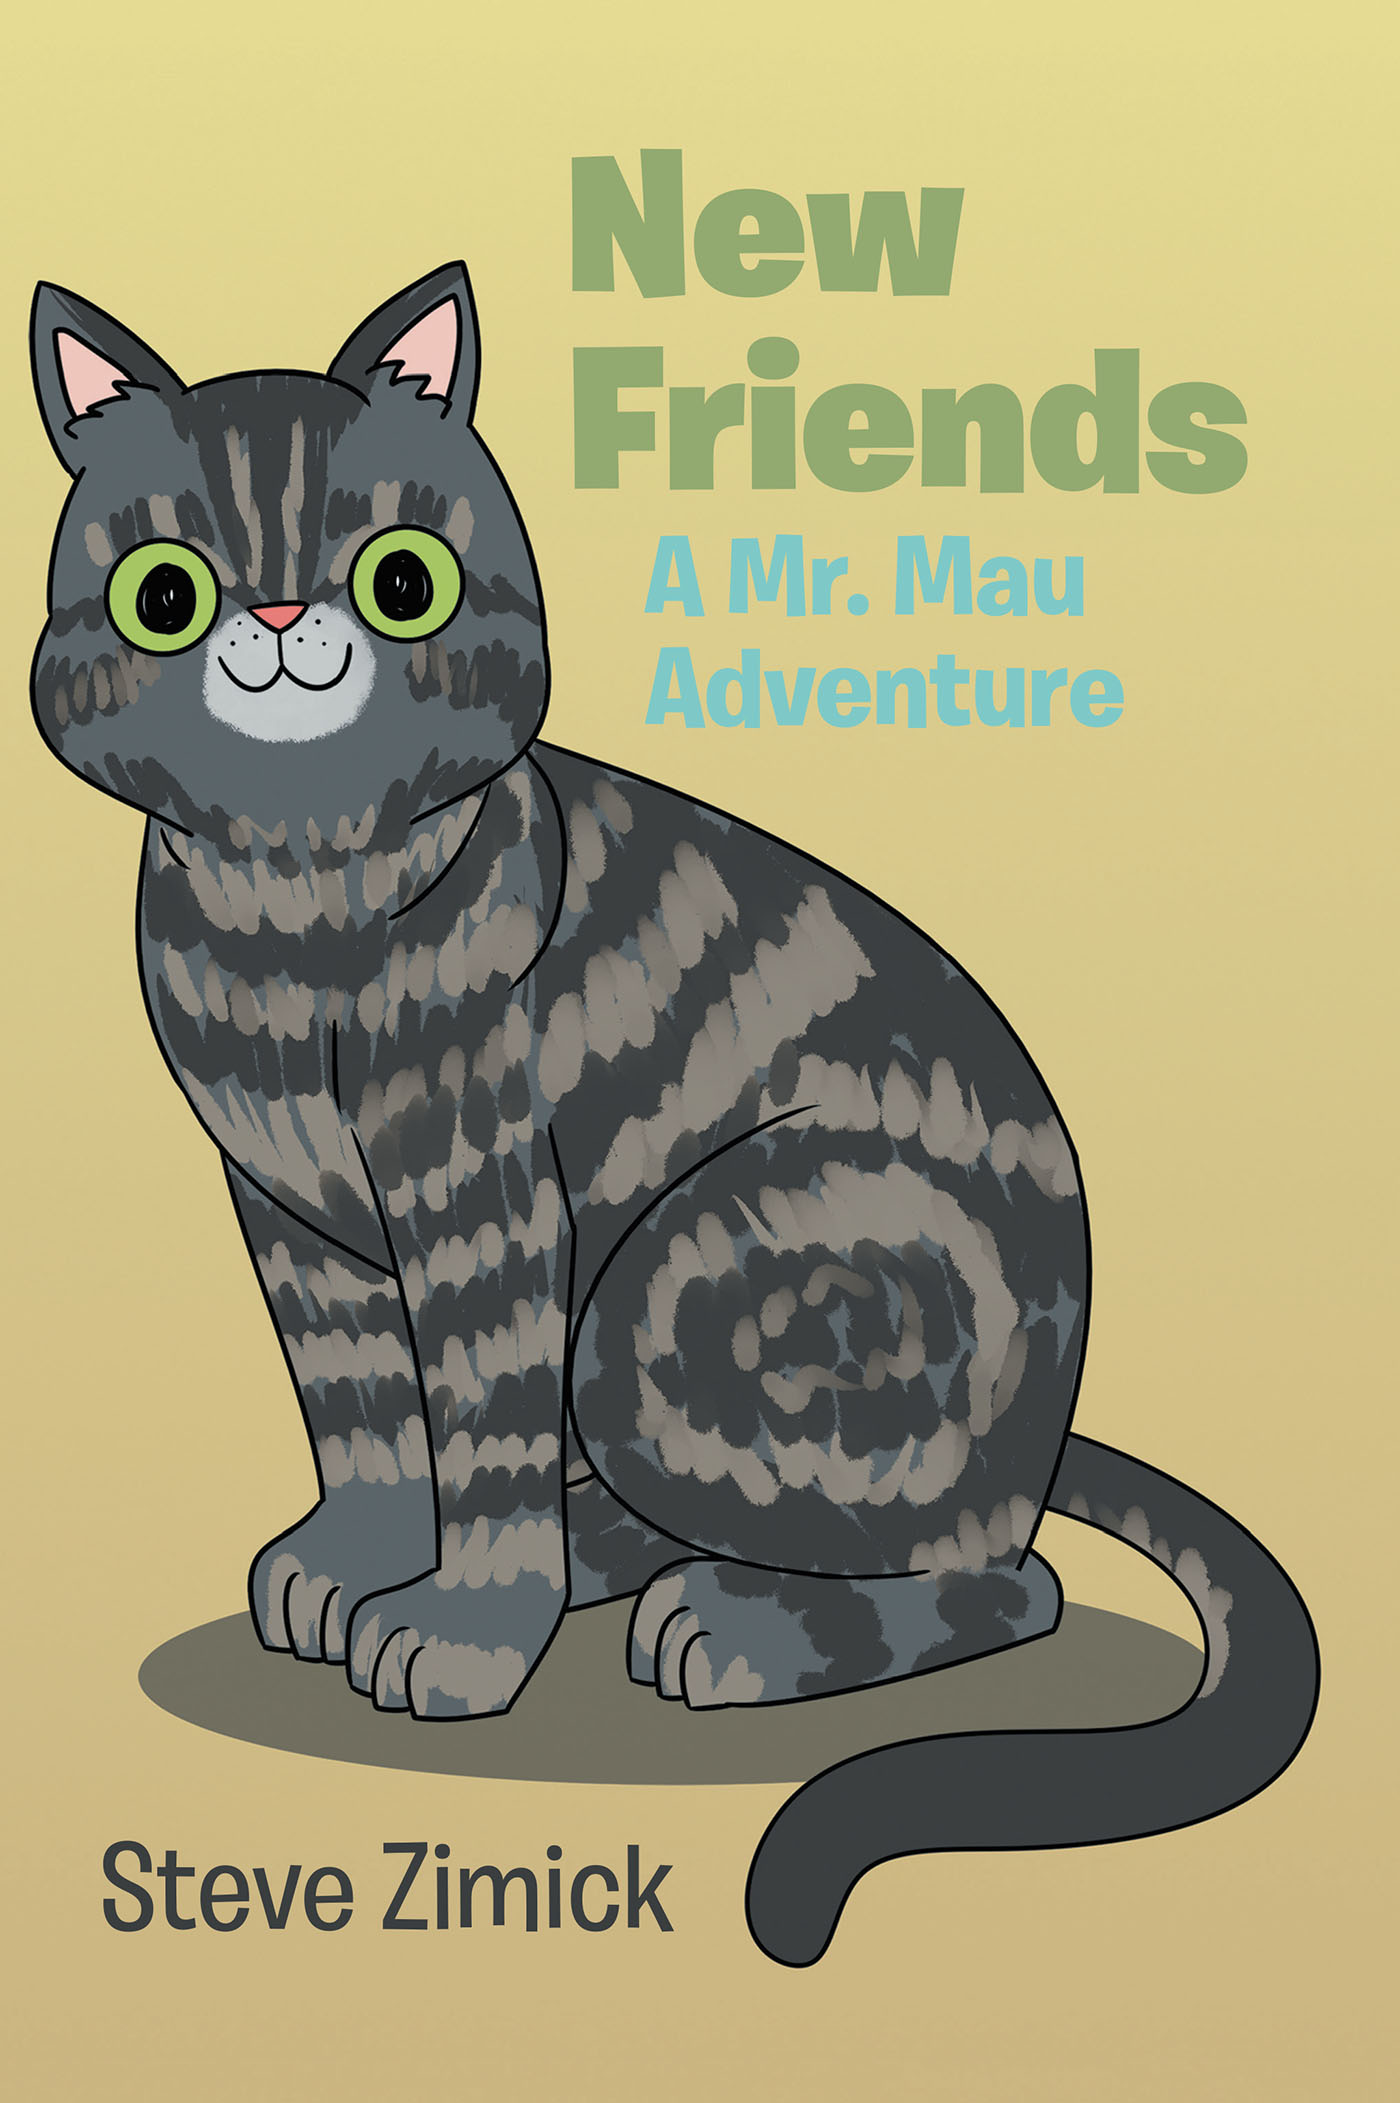 Steve Zimick’s New Book, "New Friends: A Mr. Mau Adventure," is a Wholesome Children’s Tale About a Sociable Tabby Cat Making the Acquaintance of His New Neighbors